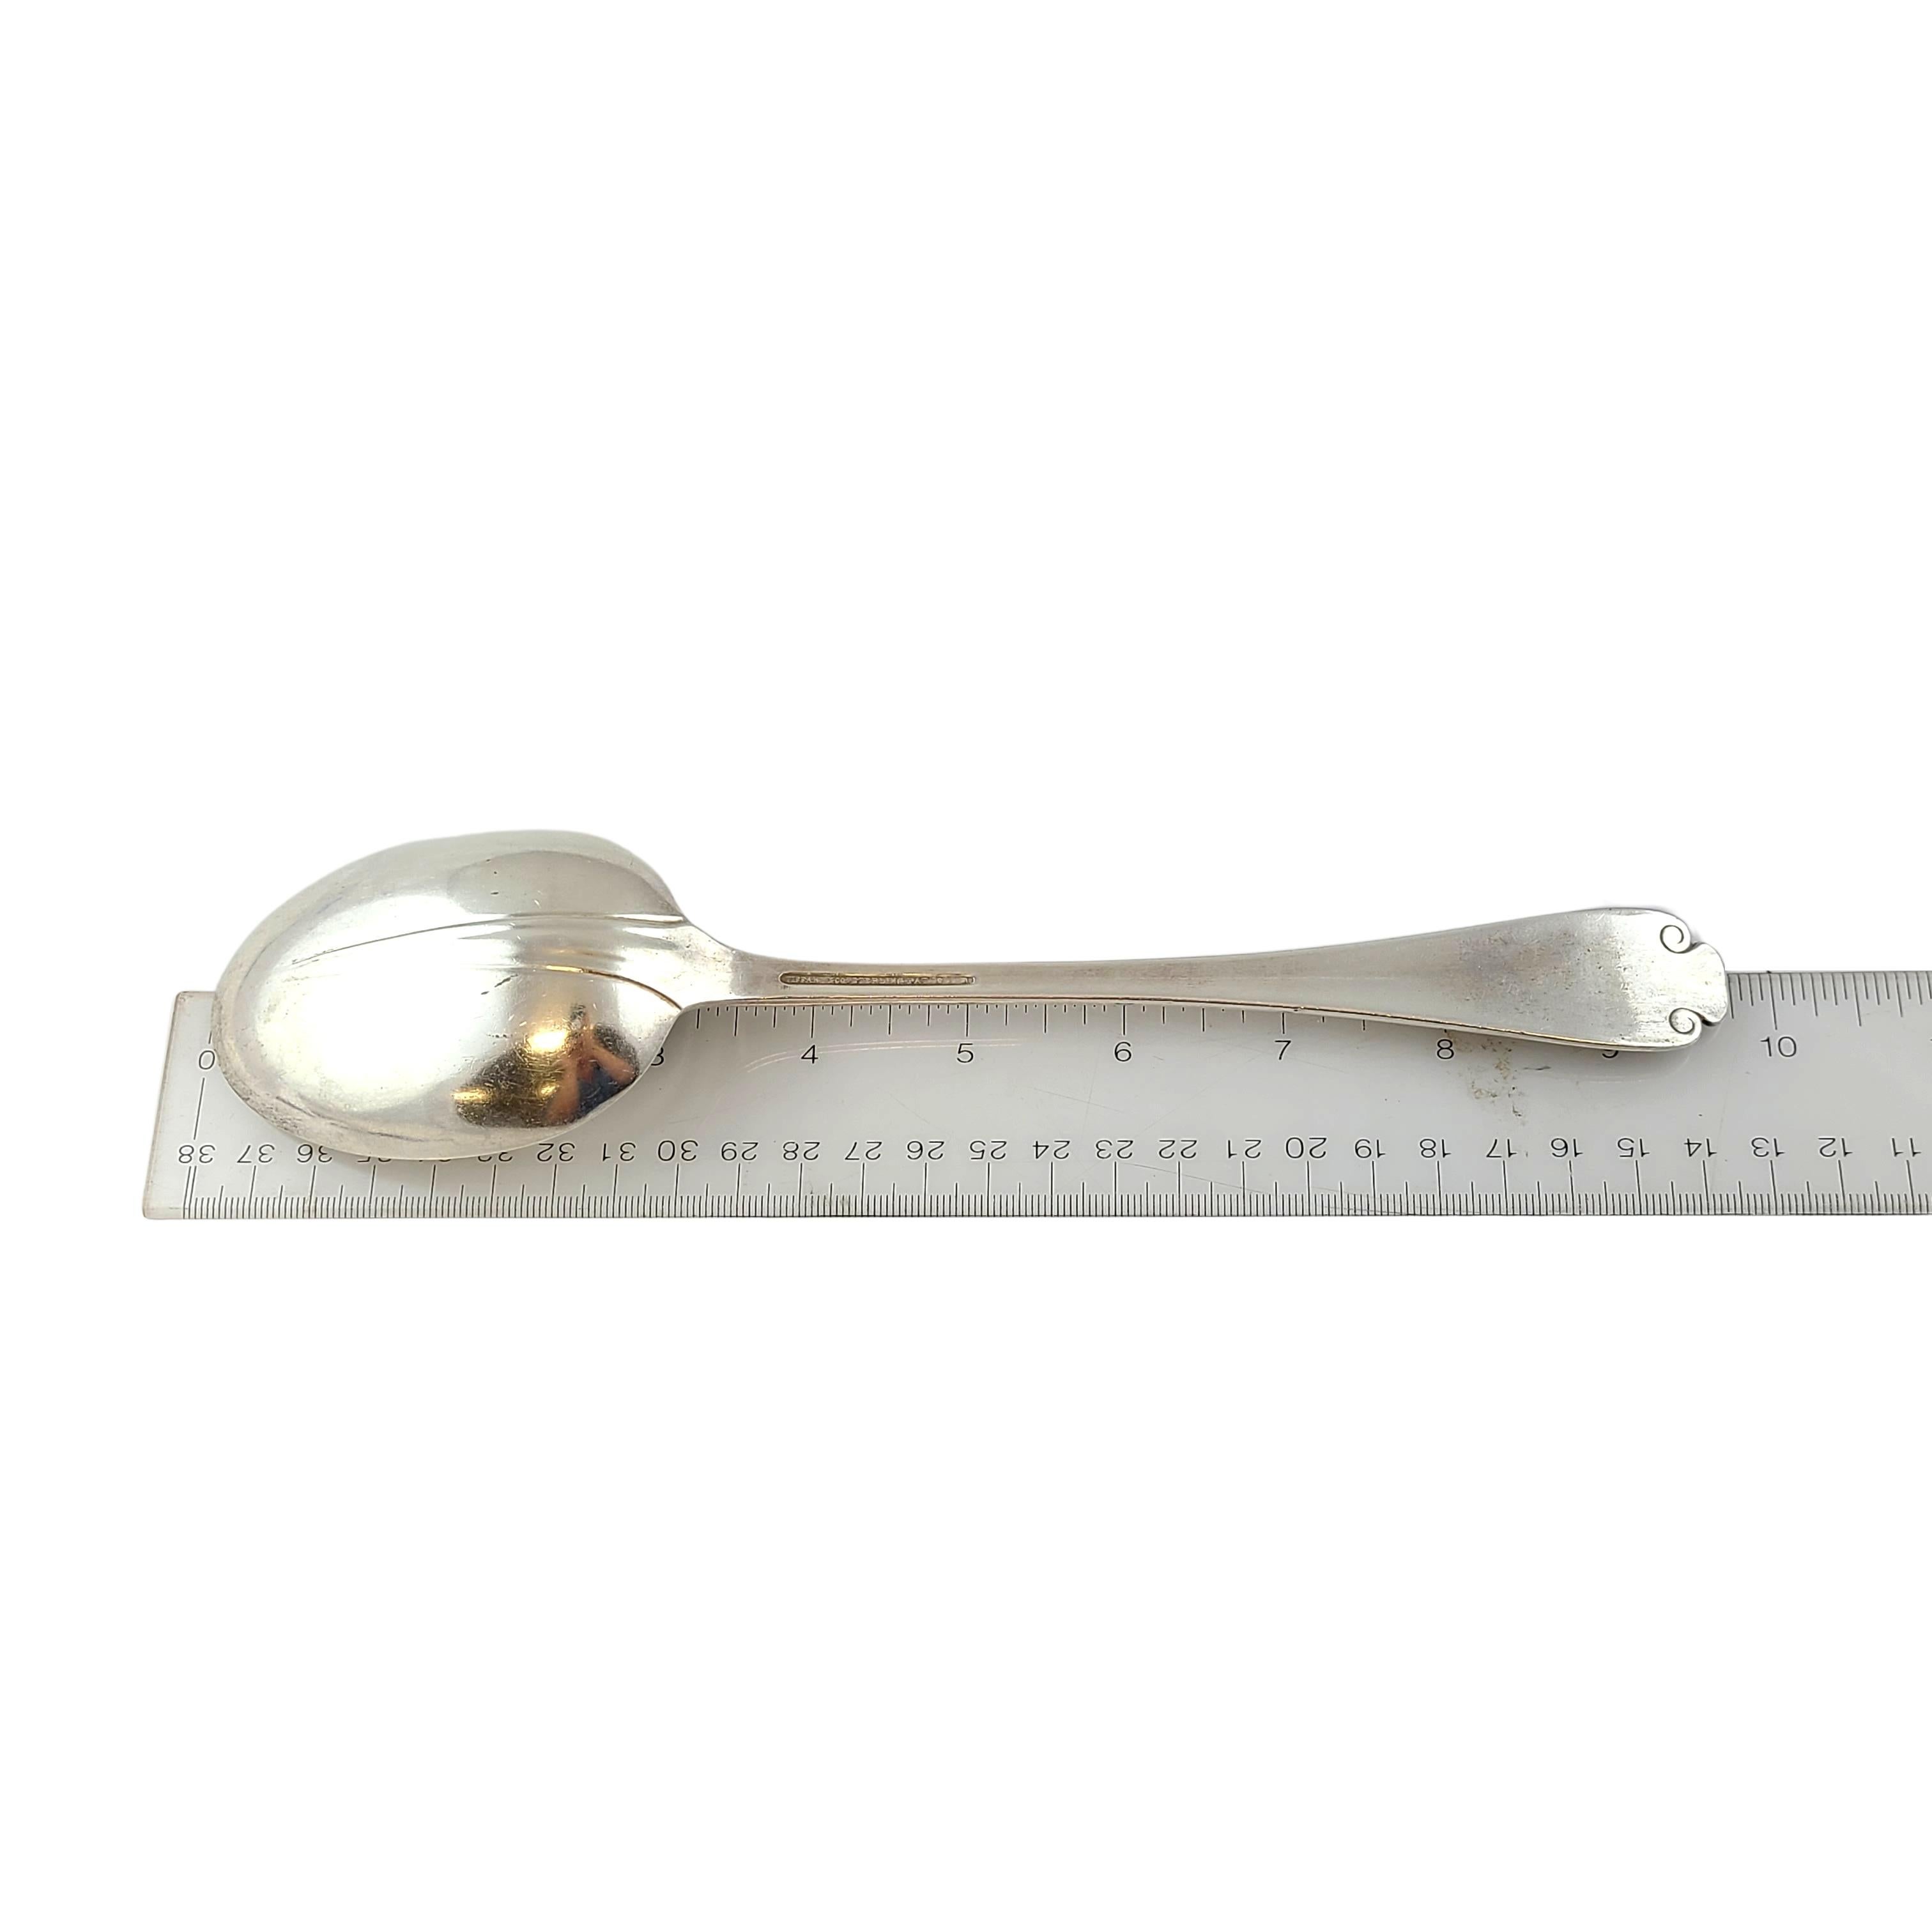 Tiffany & Co Flemish Sterling Silver Vegetable Serving Spoon with Monogram For Sale 6